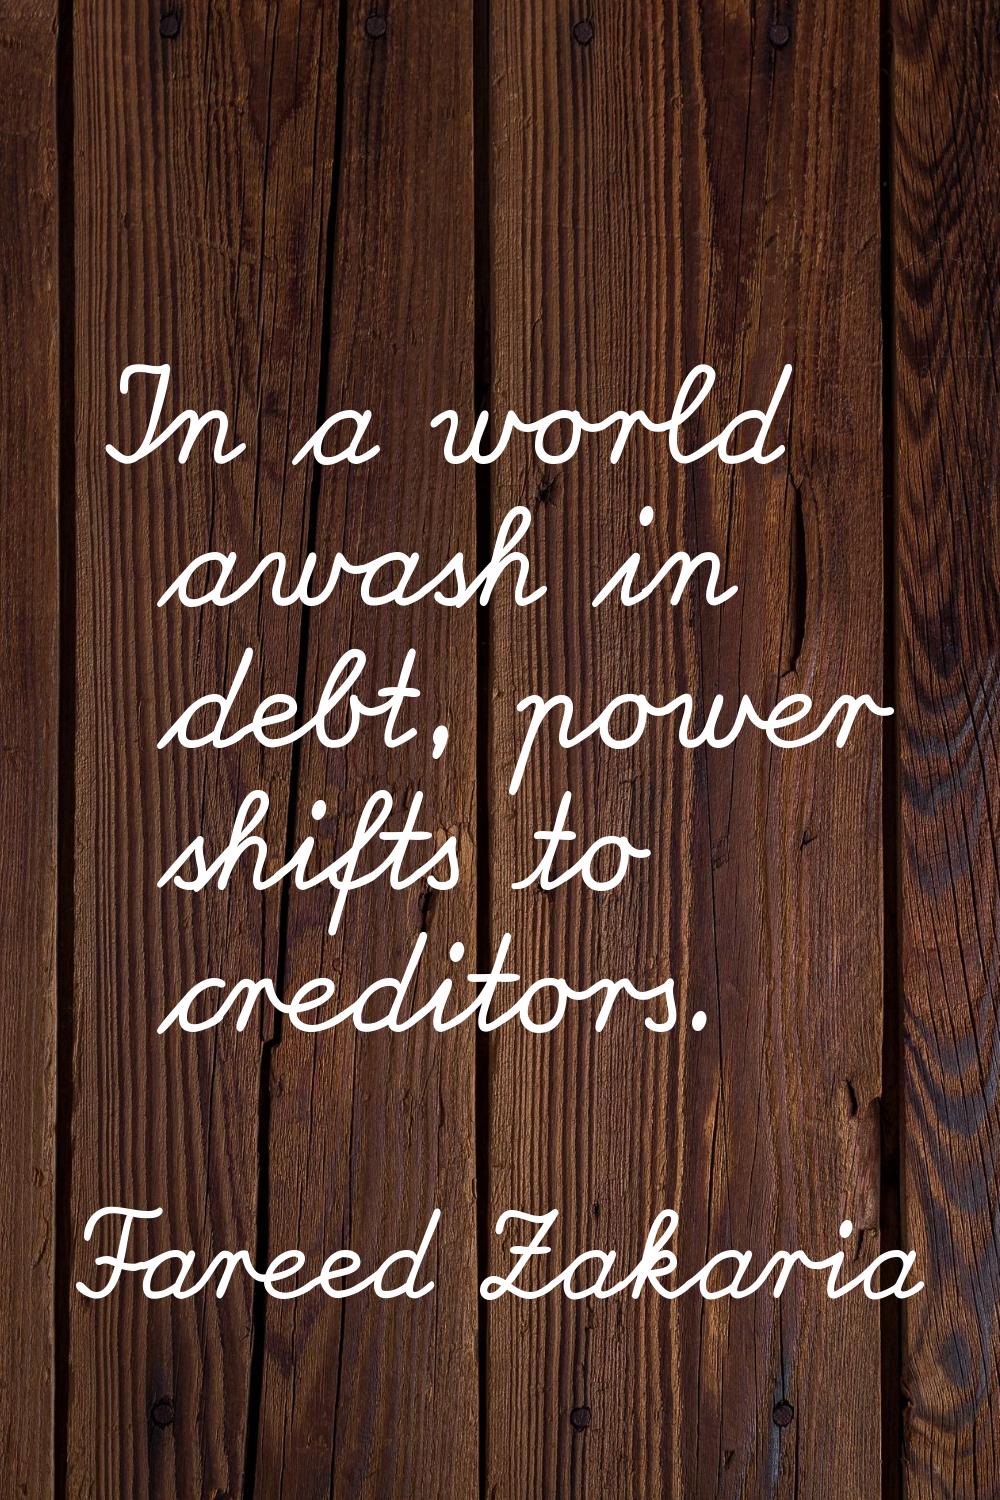 In a world awash in debt, power shifts to creditors.